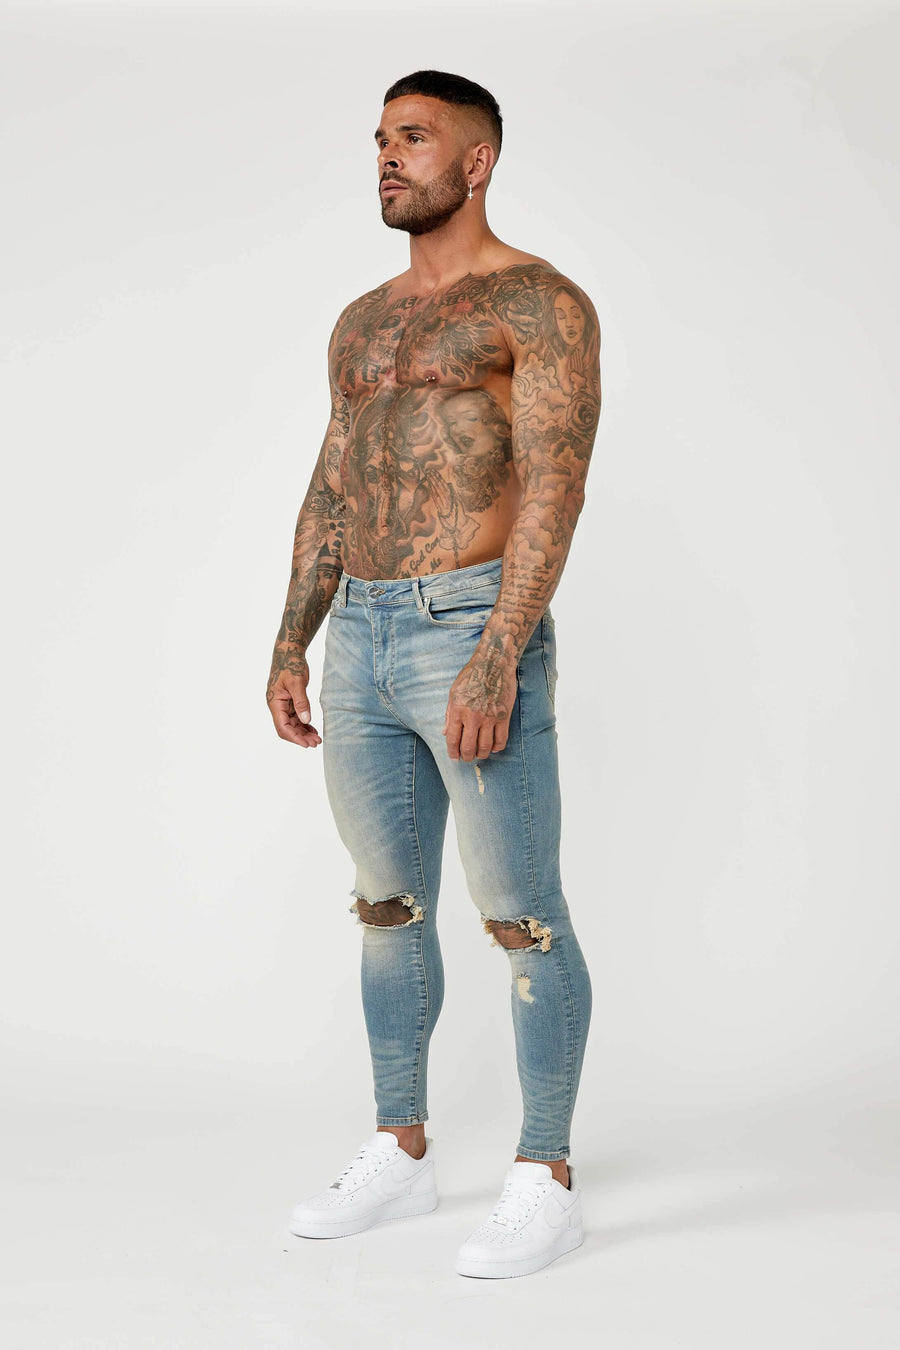 Legend London Jeans PREMIUM SPRAY-ON FIT JEANS - STONE WASH DESTROYED KNEE